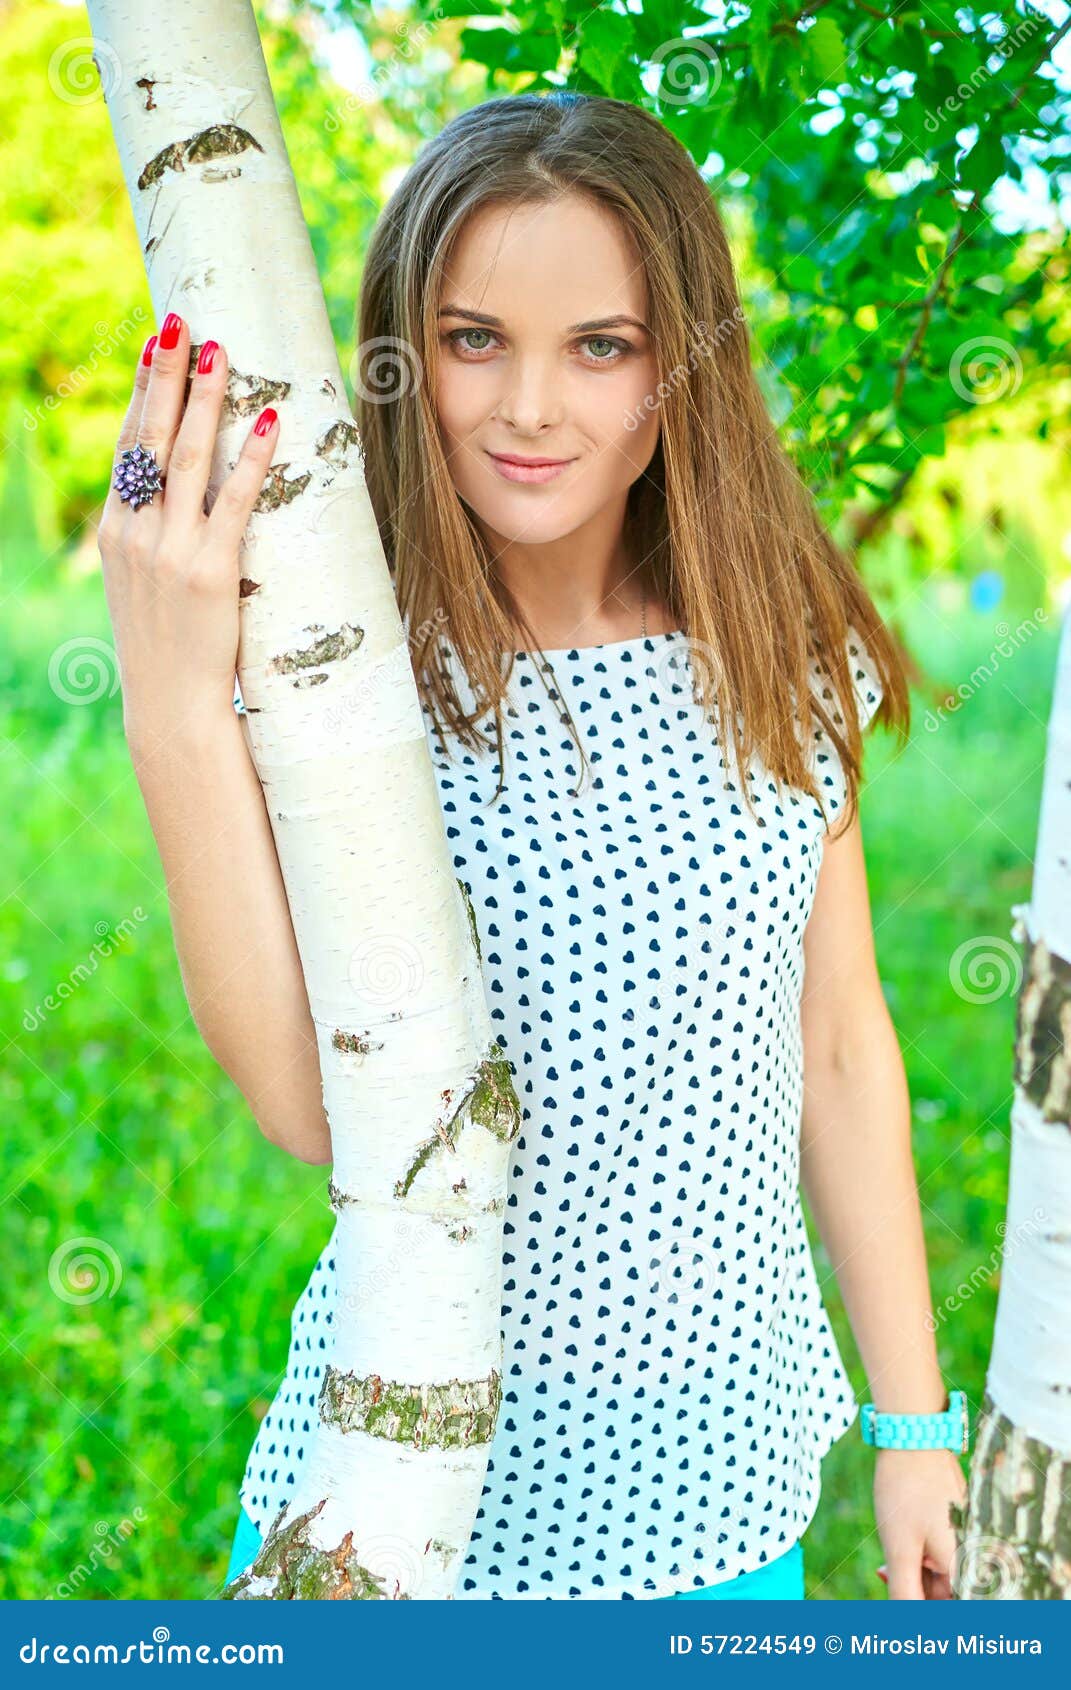 Girl at a birch stock image. Image of beauty, female - 57224549